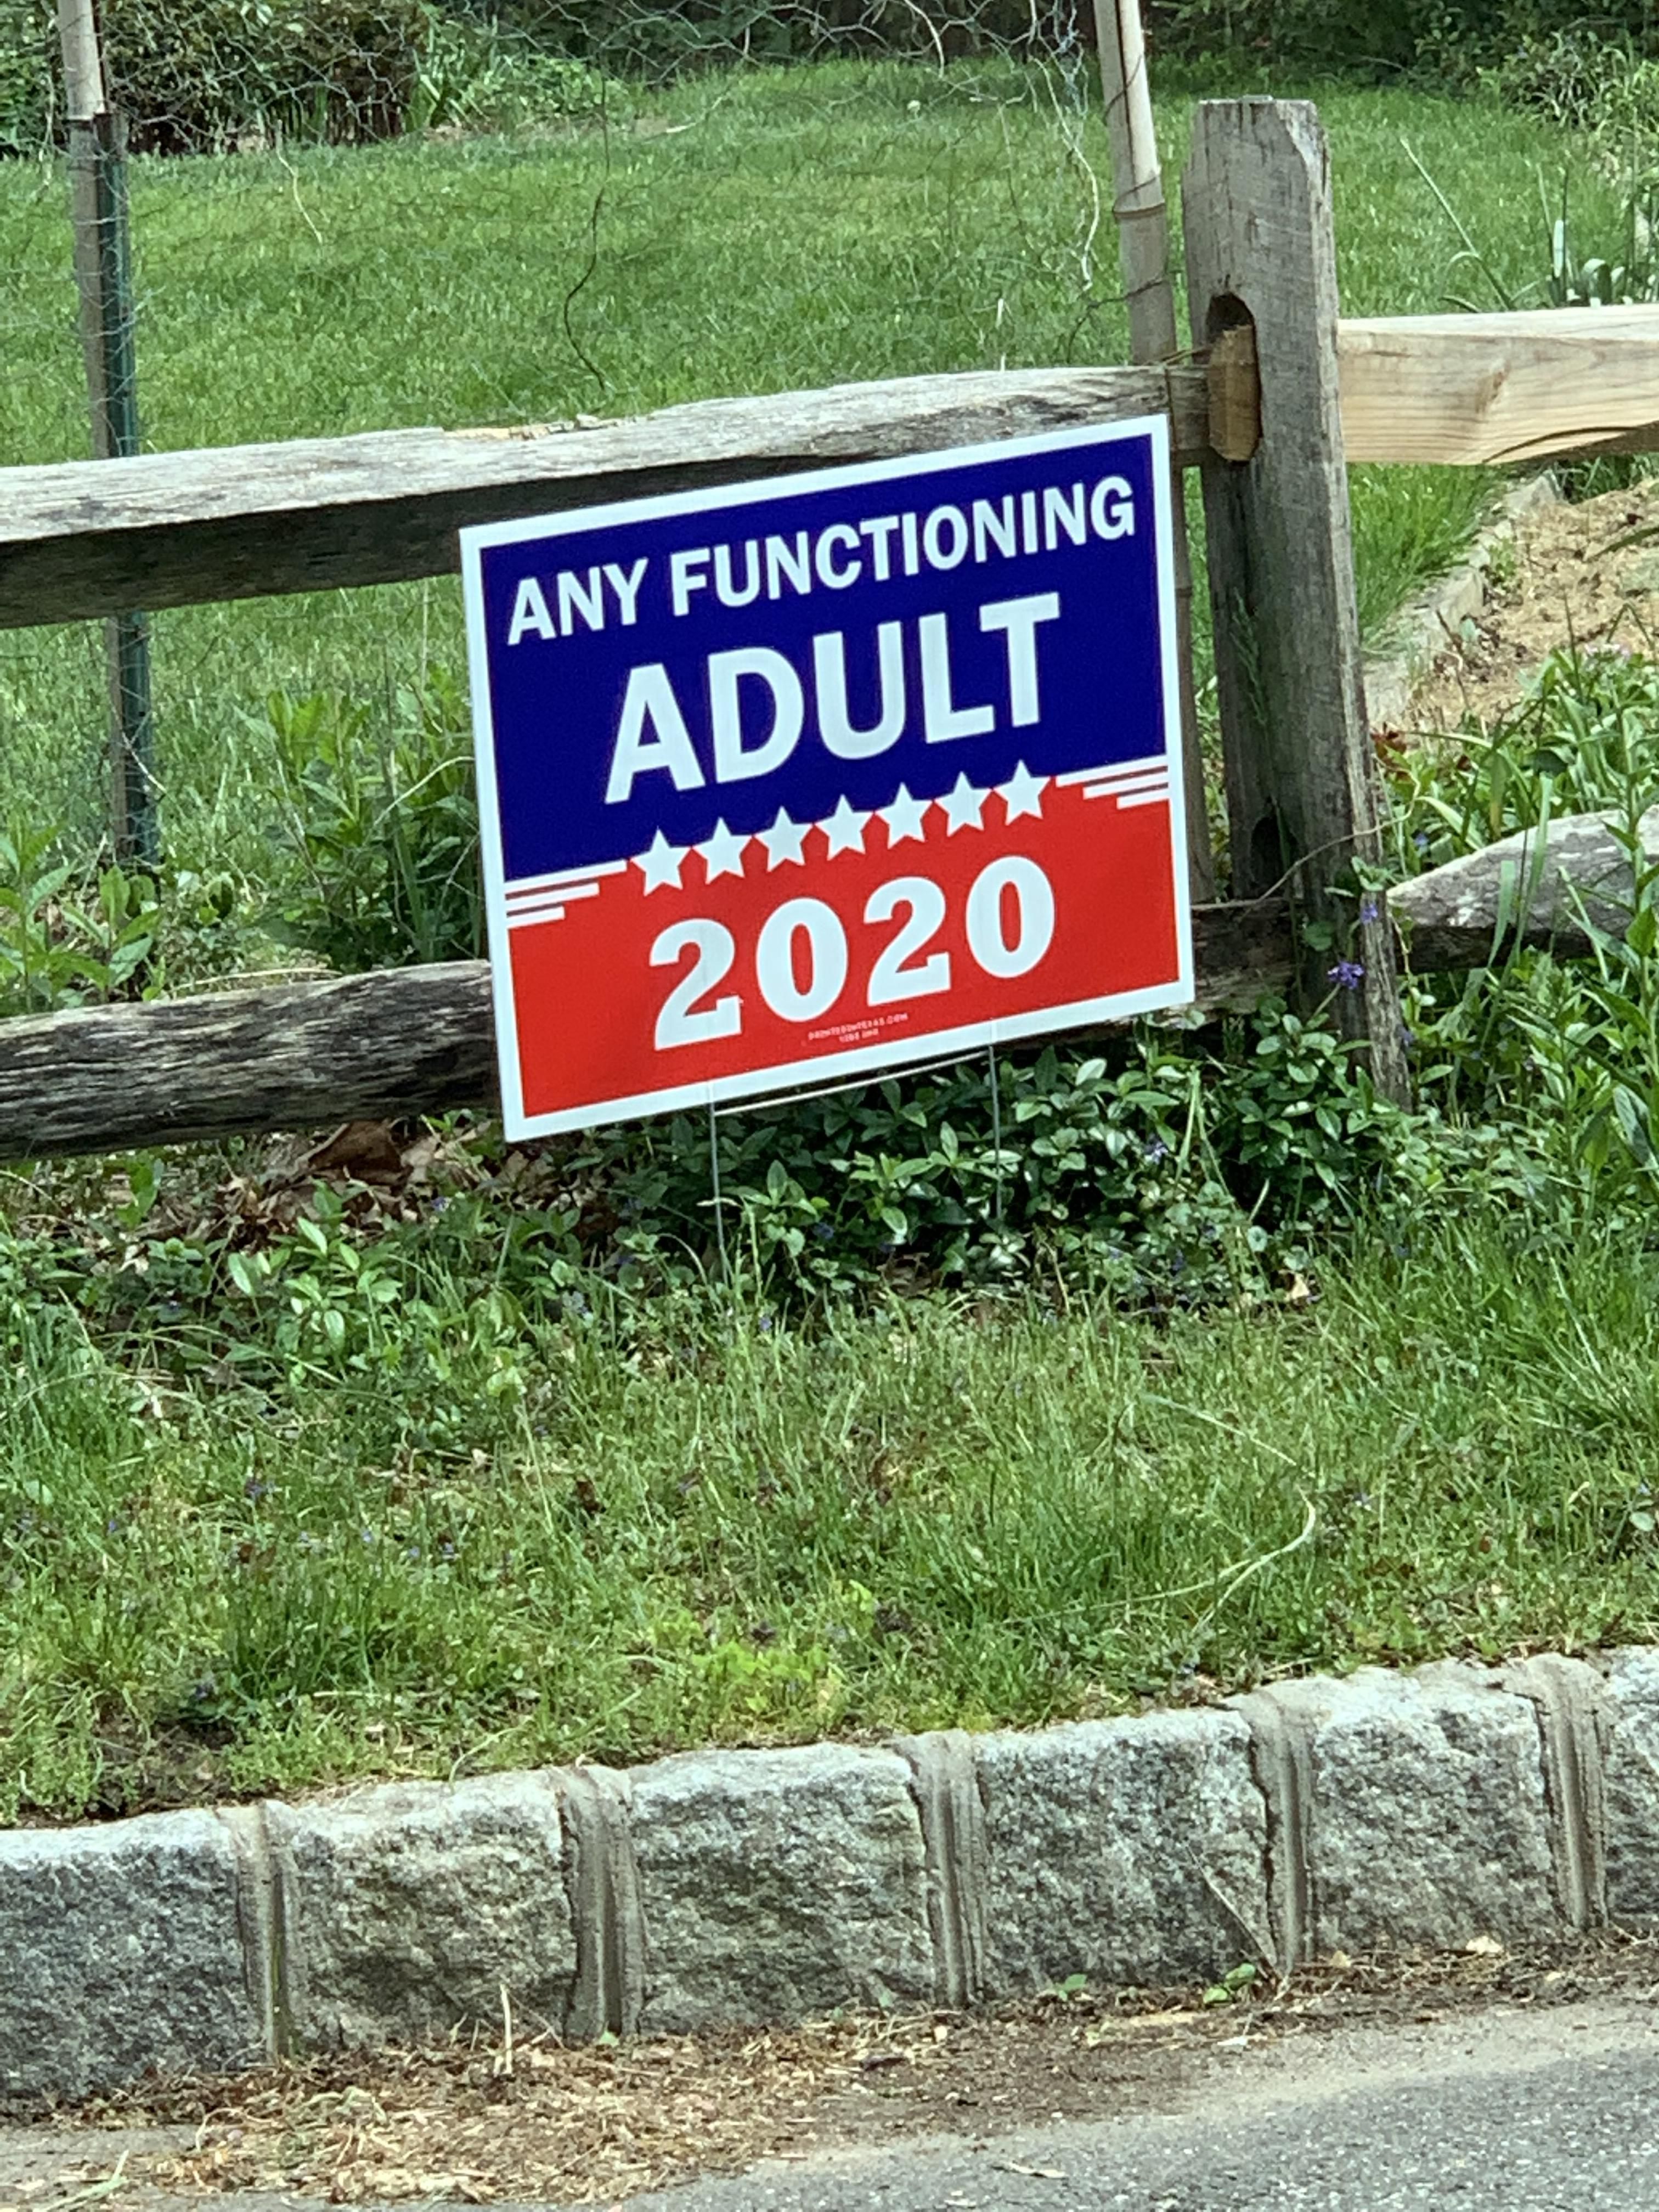 Really is a lot to ask for in 2020...